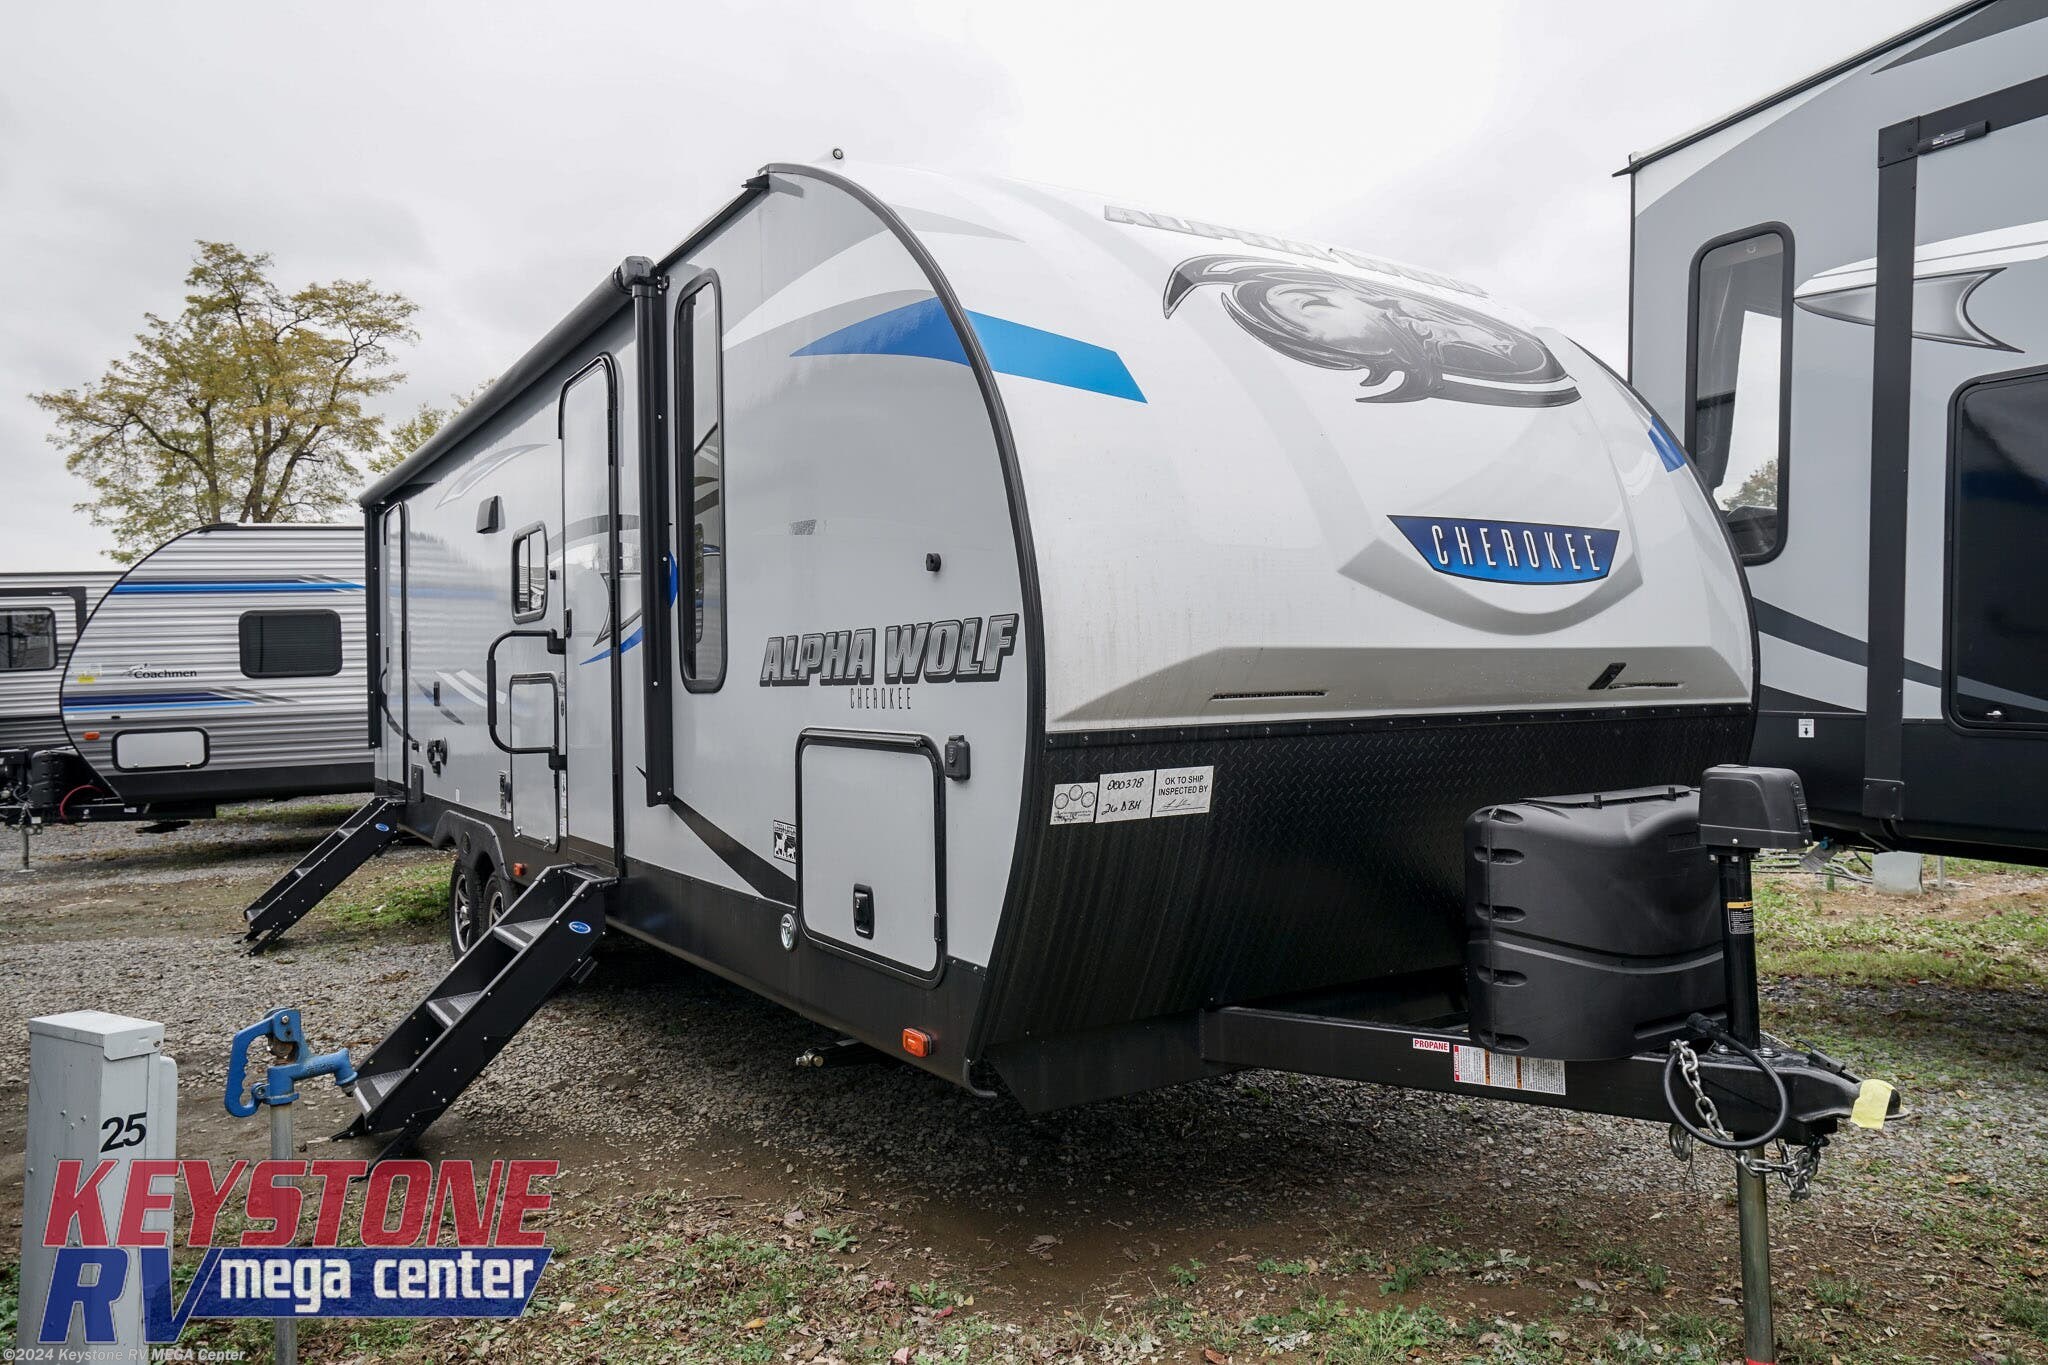 2020 Forest River Alpha Wolf 26DBH-L RV for Sale in Greencastle, PA 17225 | 14477 | RVUSA.com 2020 Forest River Alpha Wolf 26dbh L